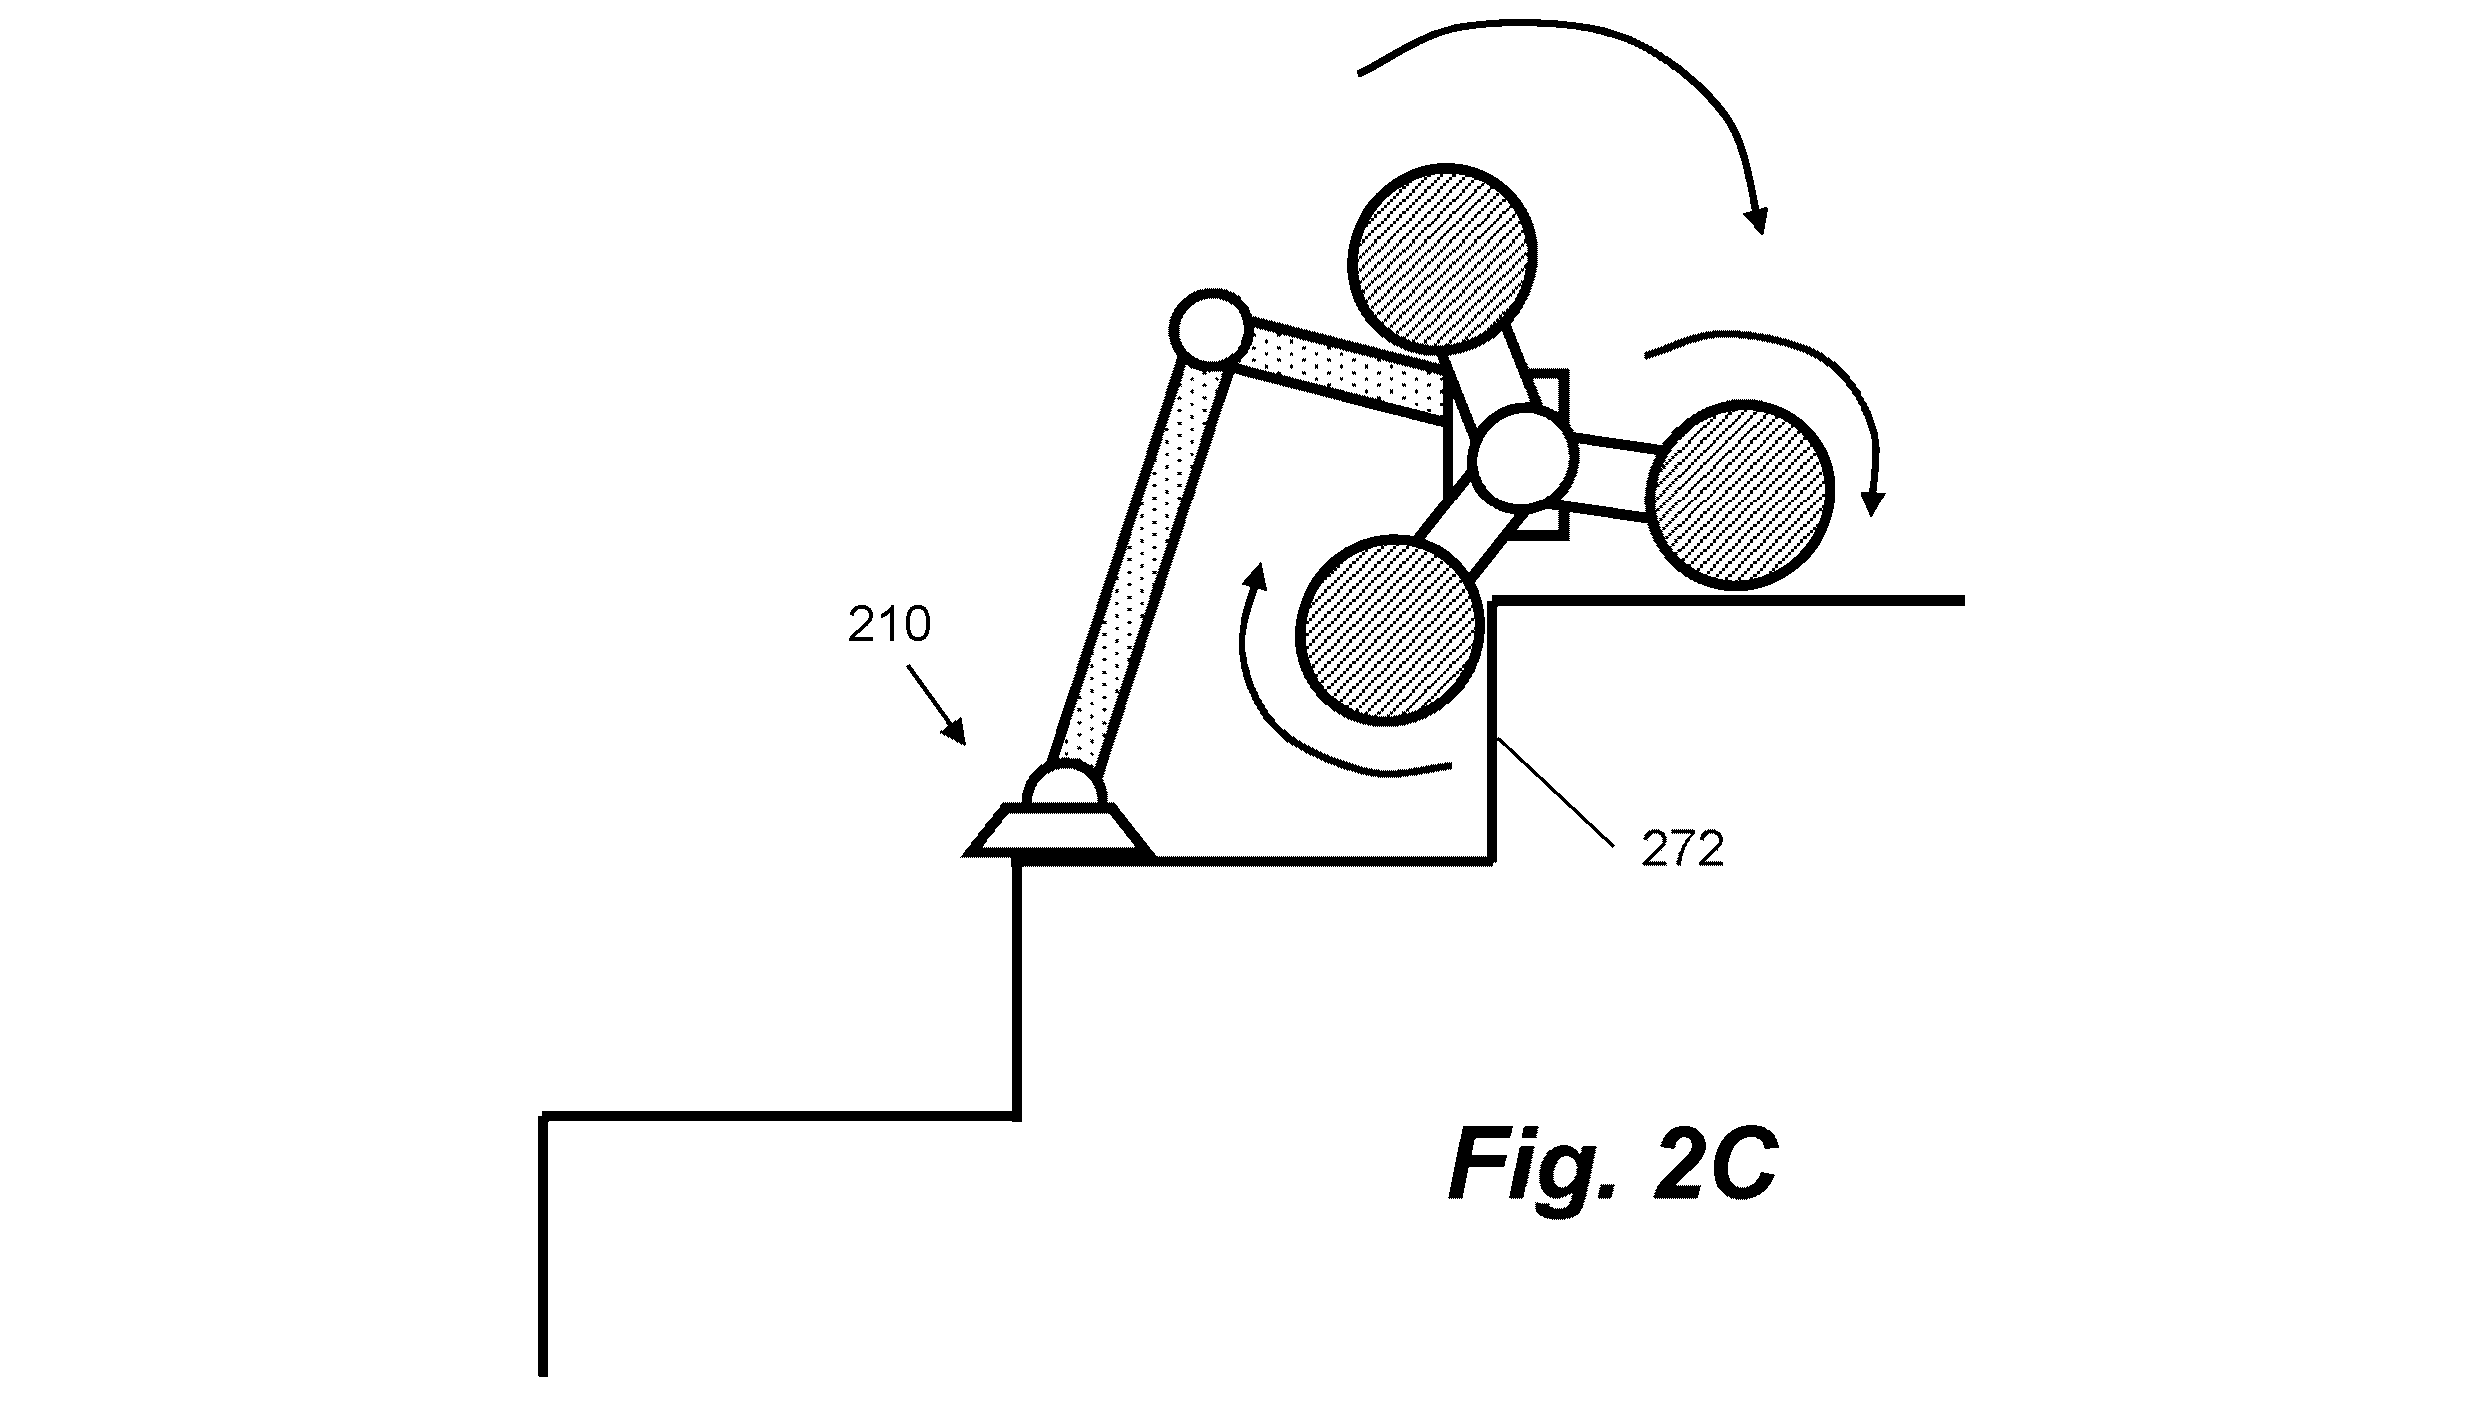 A sample figure of how the Dyson vacuum would move up and down the stairs. (Image: U.K. Intellectual Property Office)